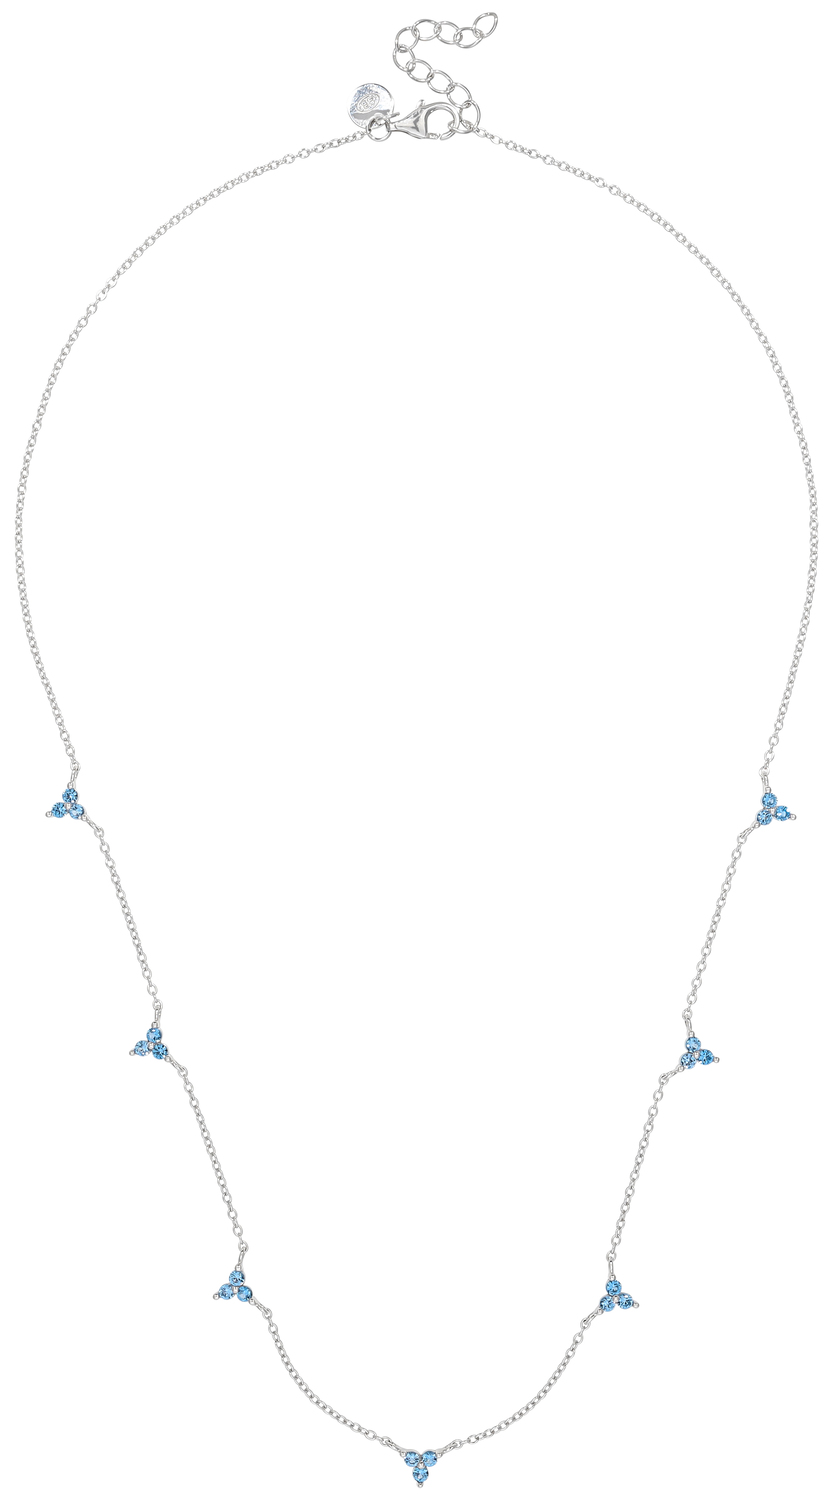 Ketting - Blue Triangles